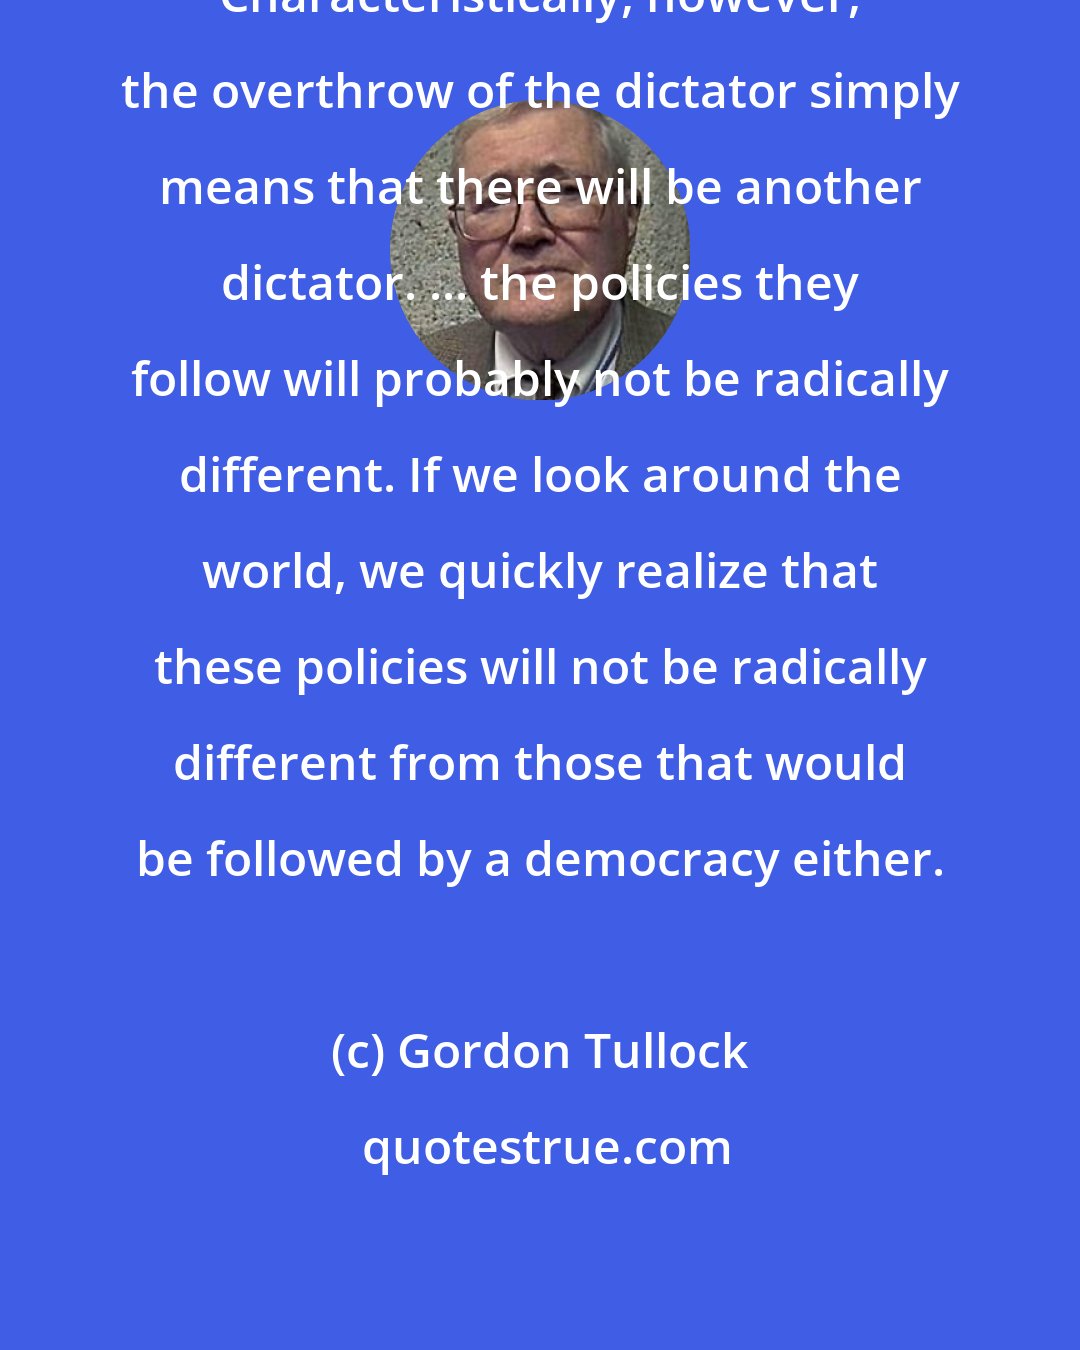 Gordon Tullock: Characteristically, however, the overthrow of the dictator simply means that there will be another dictator. ... the policies they follow will probably not be radically different. If we look around the world, we quickly realize that these policies will not be radically different from those that would be followed by a democracy either.